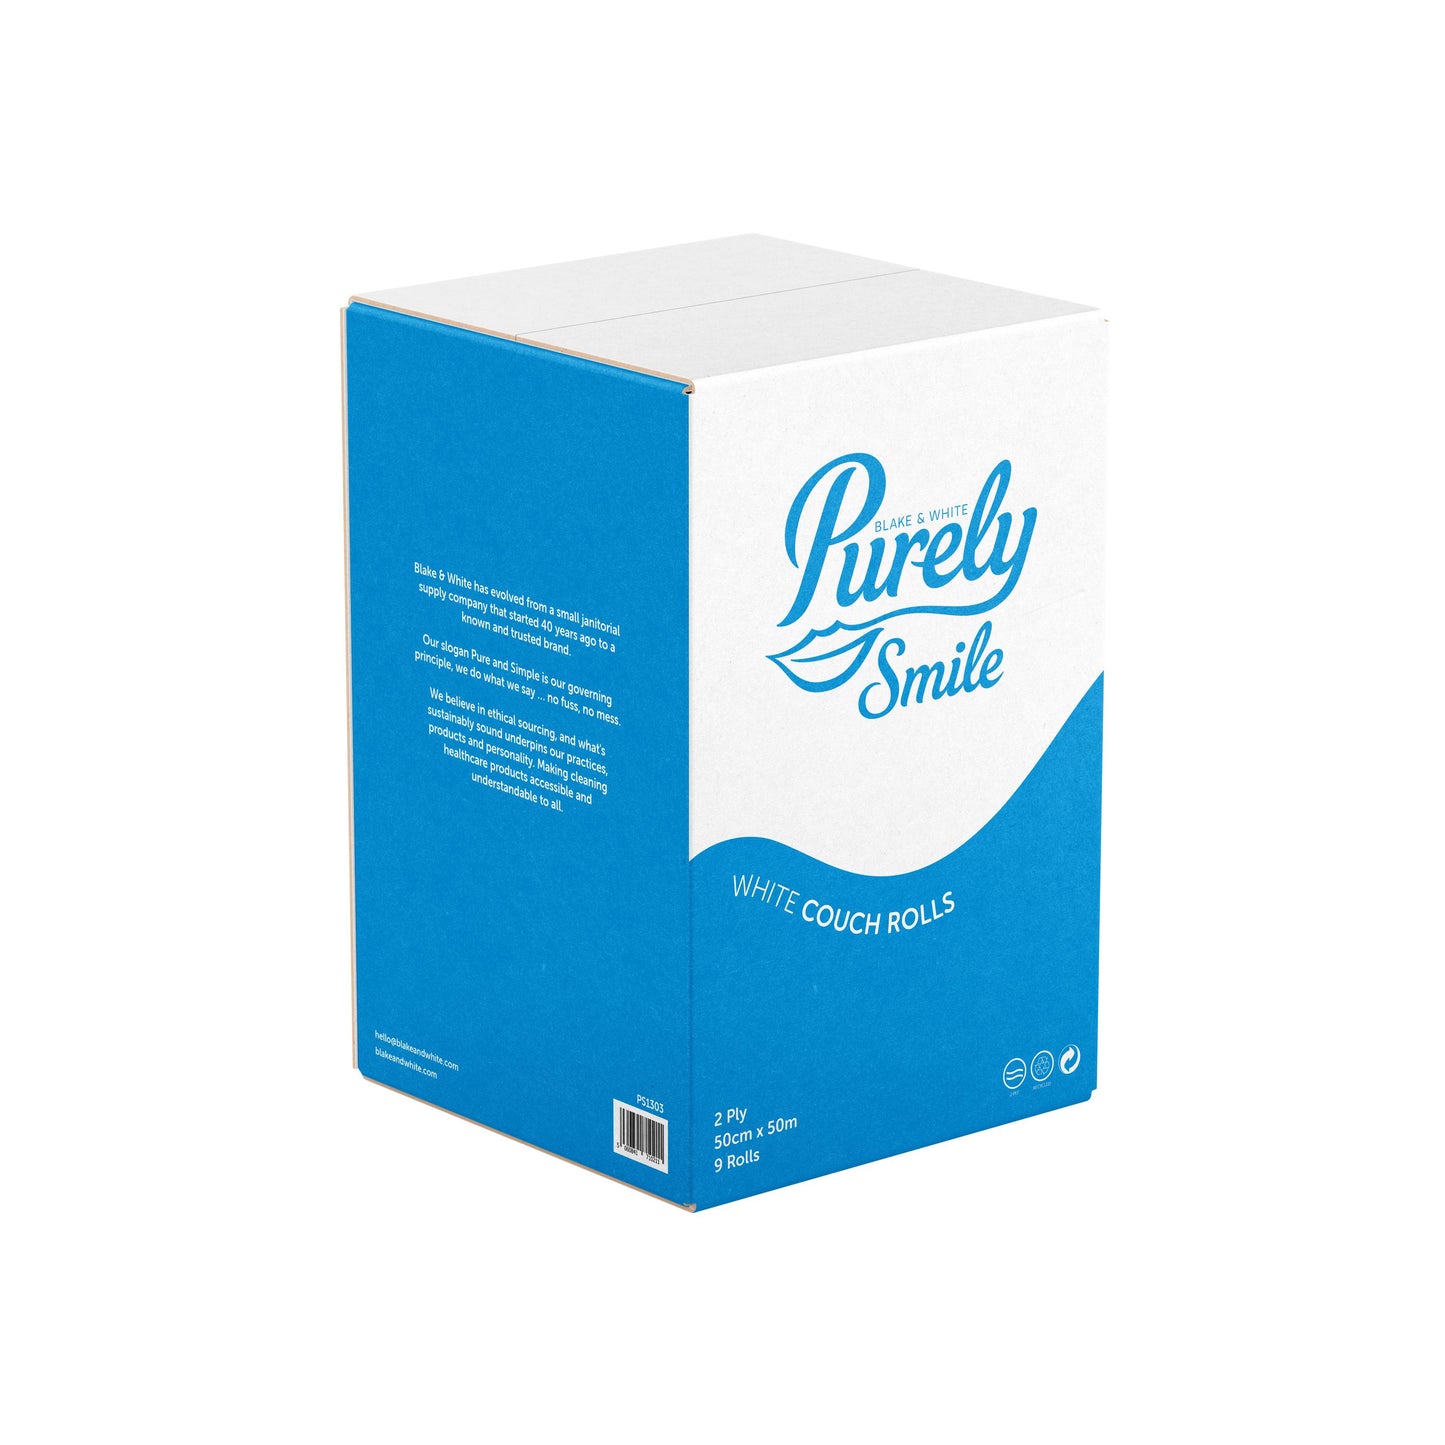 Purely Smile Couch Roll 50cm x 40m 2ply White Pack of 9